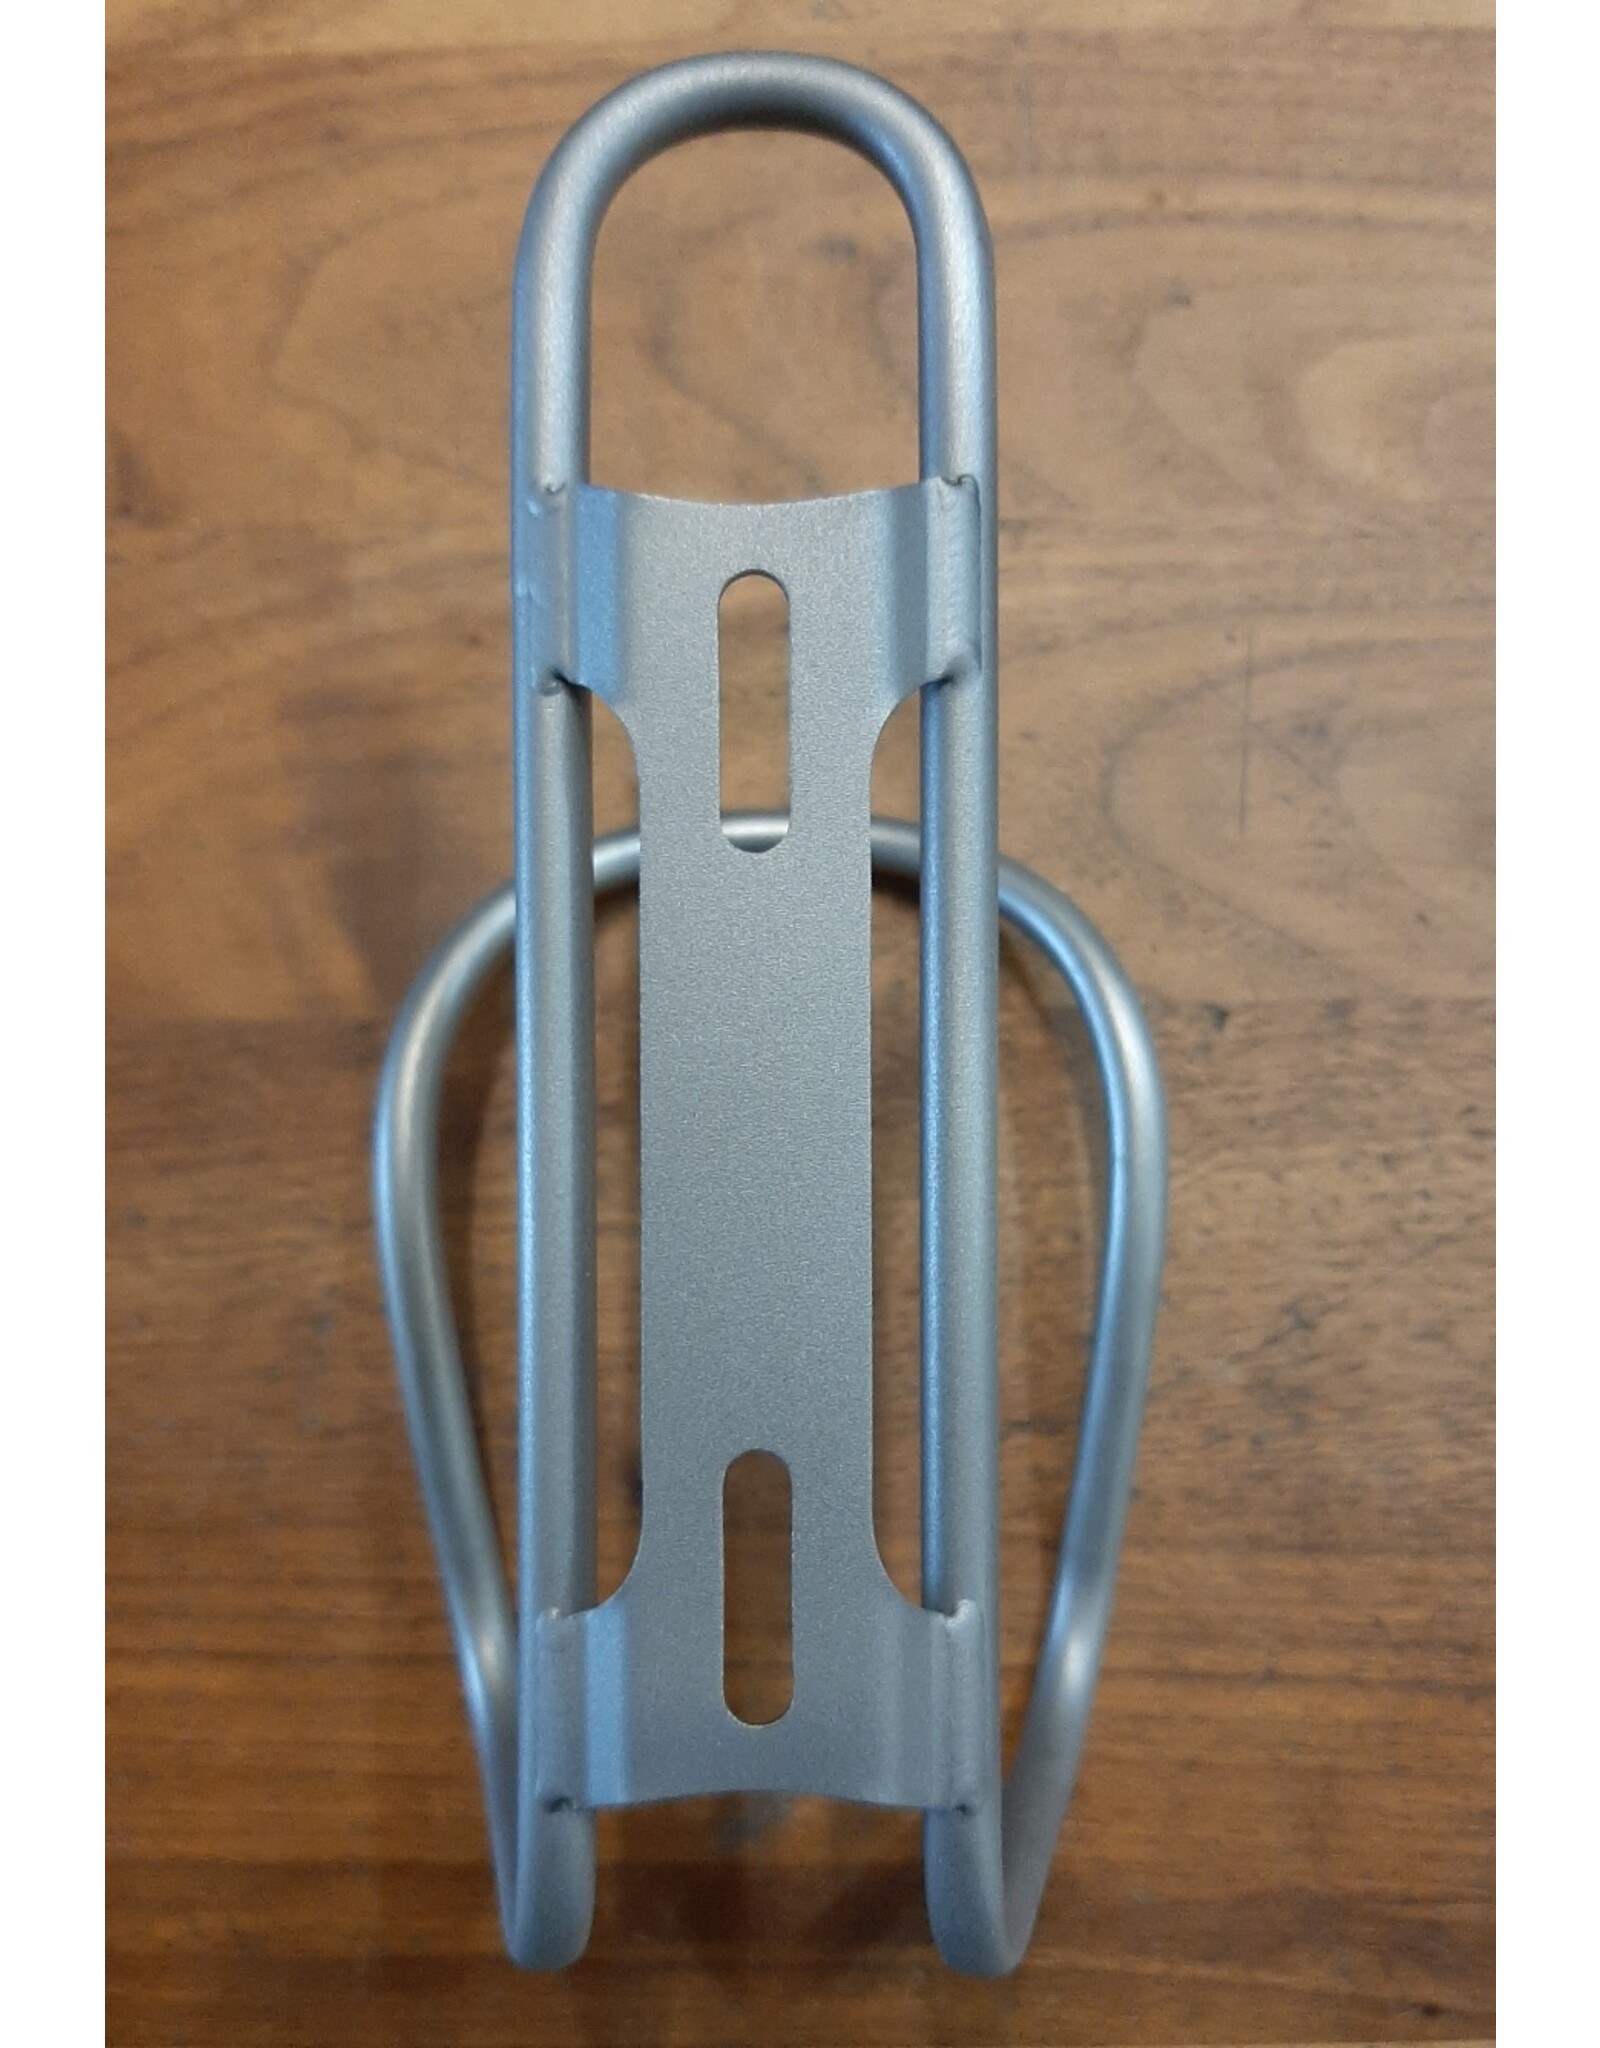 Atbco / All Time Bike Co. All Time / ATBCO Titanium water bottle cage